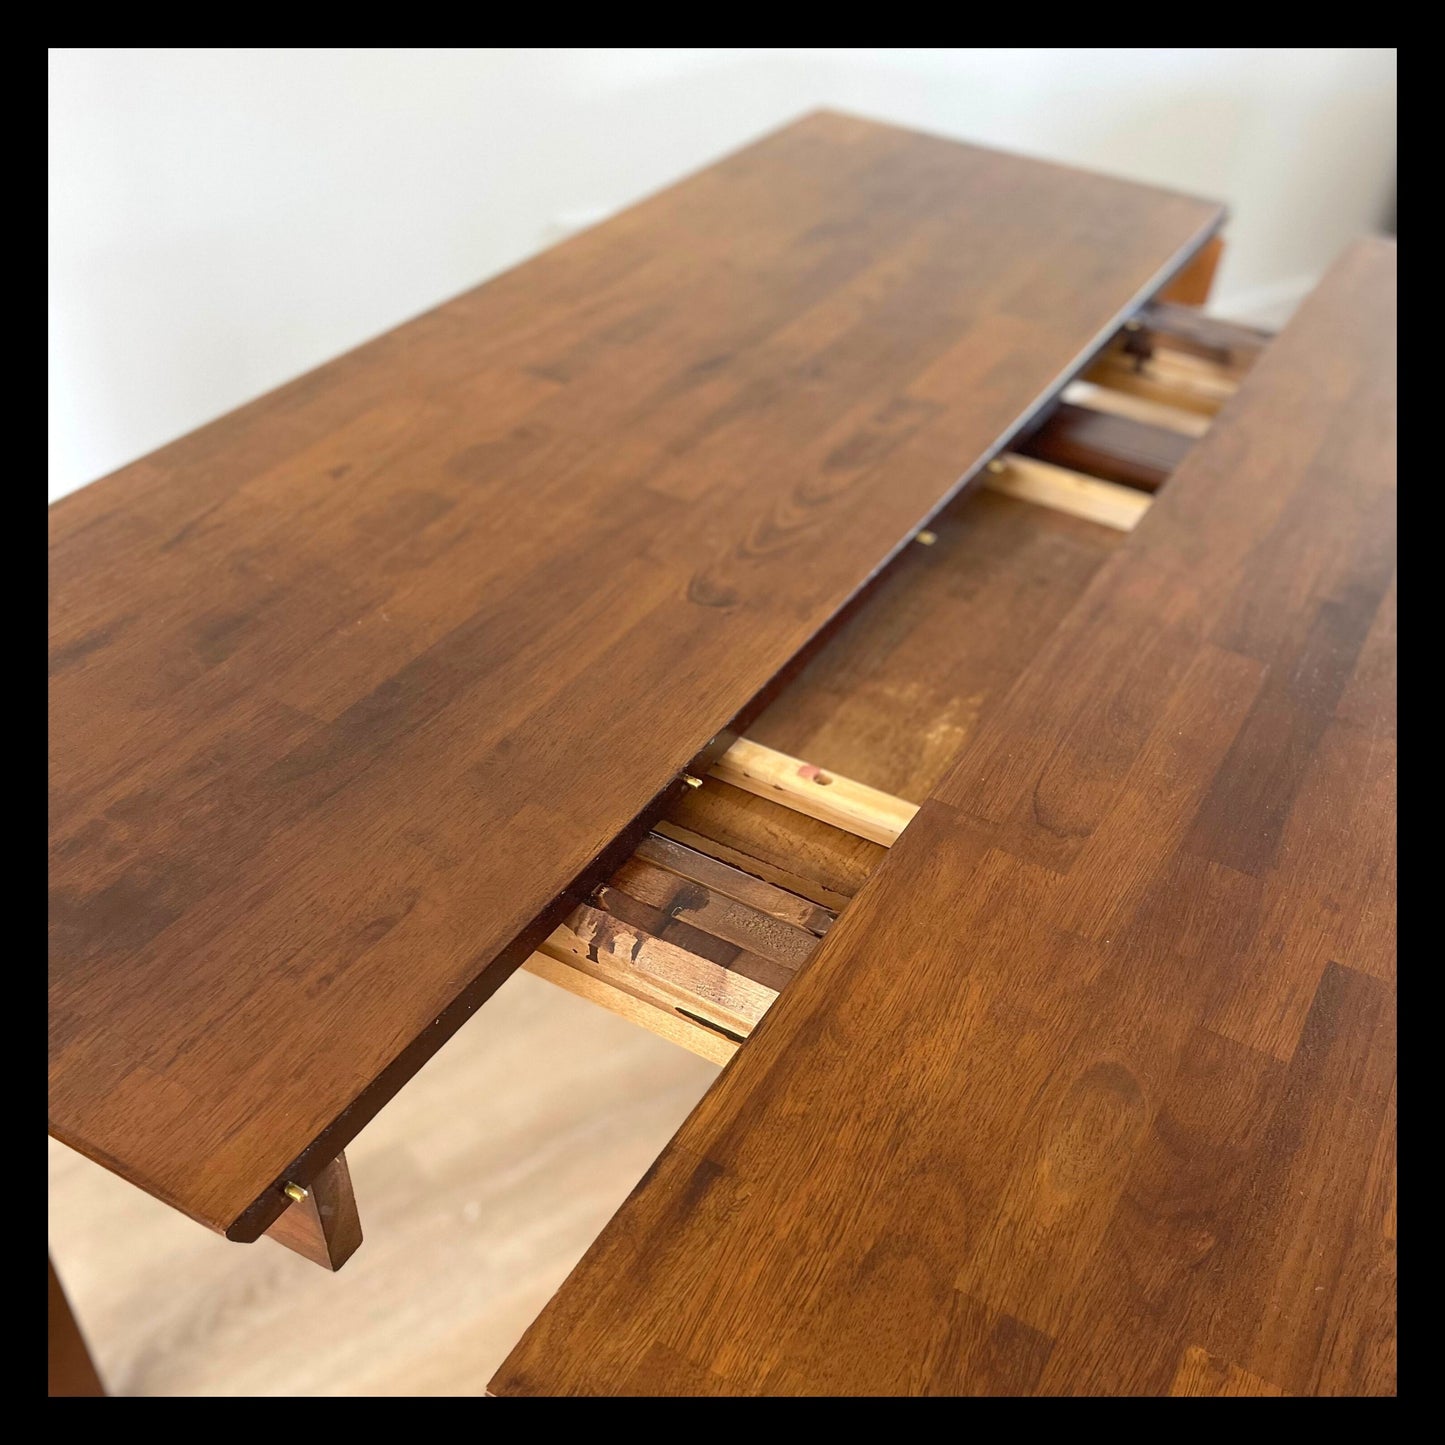 [SOLD] Stylish Wood Dining Room Table and Chairs | Self-Storing Butterfly Leaf | Great Condition